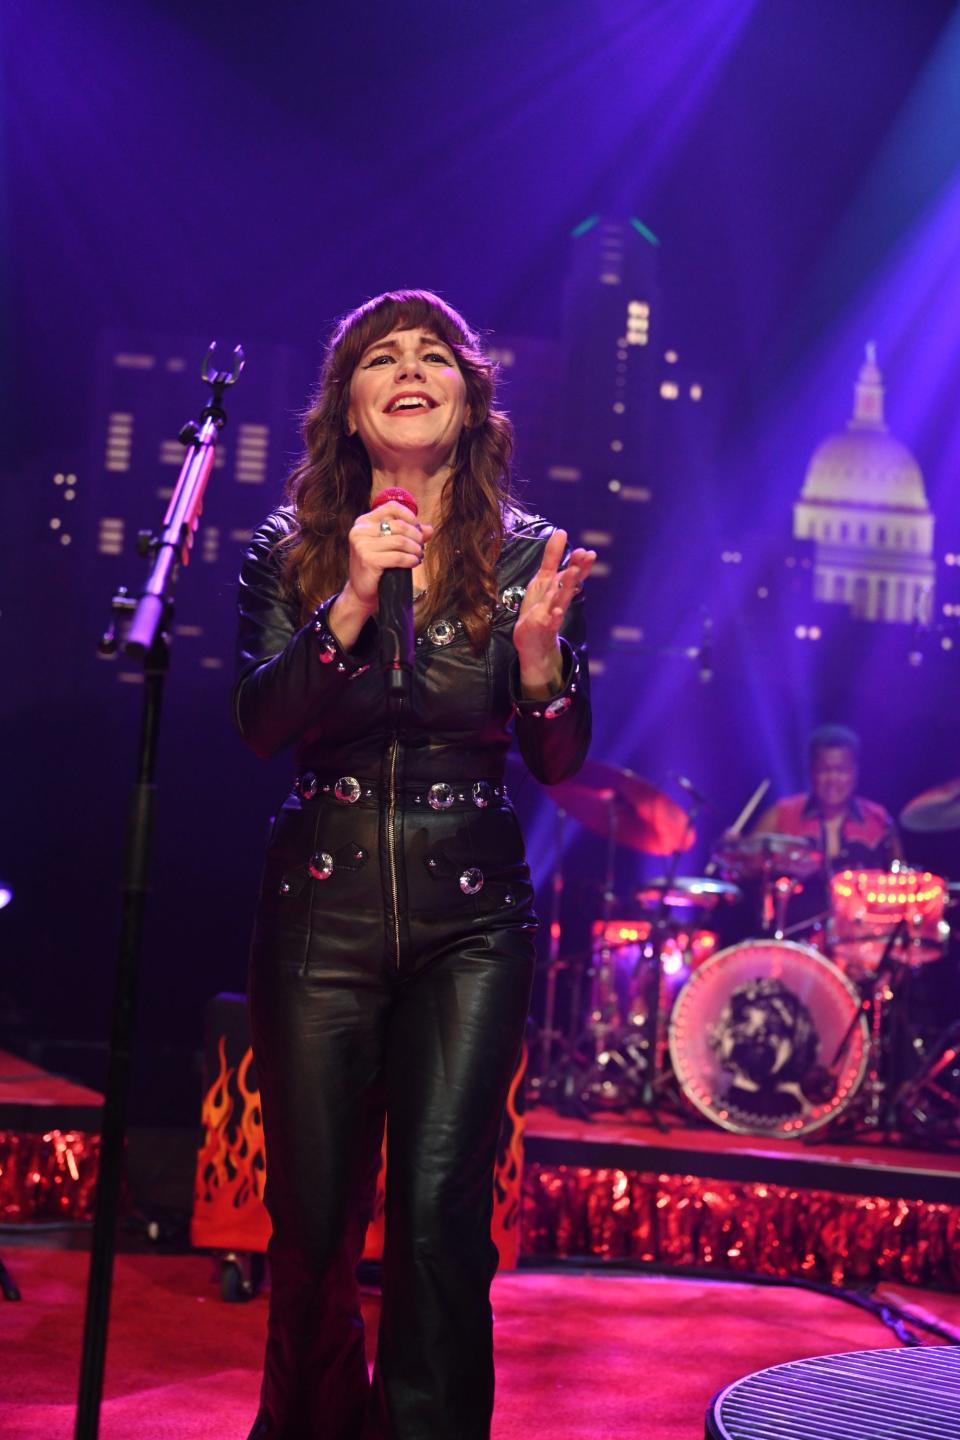 Jenny Lewis was radiant and warm during her "ACL" taping. "What a joy to be back here at 'ACL.' What a treat," she said near the top of the show.